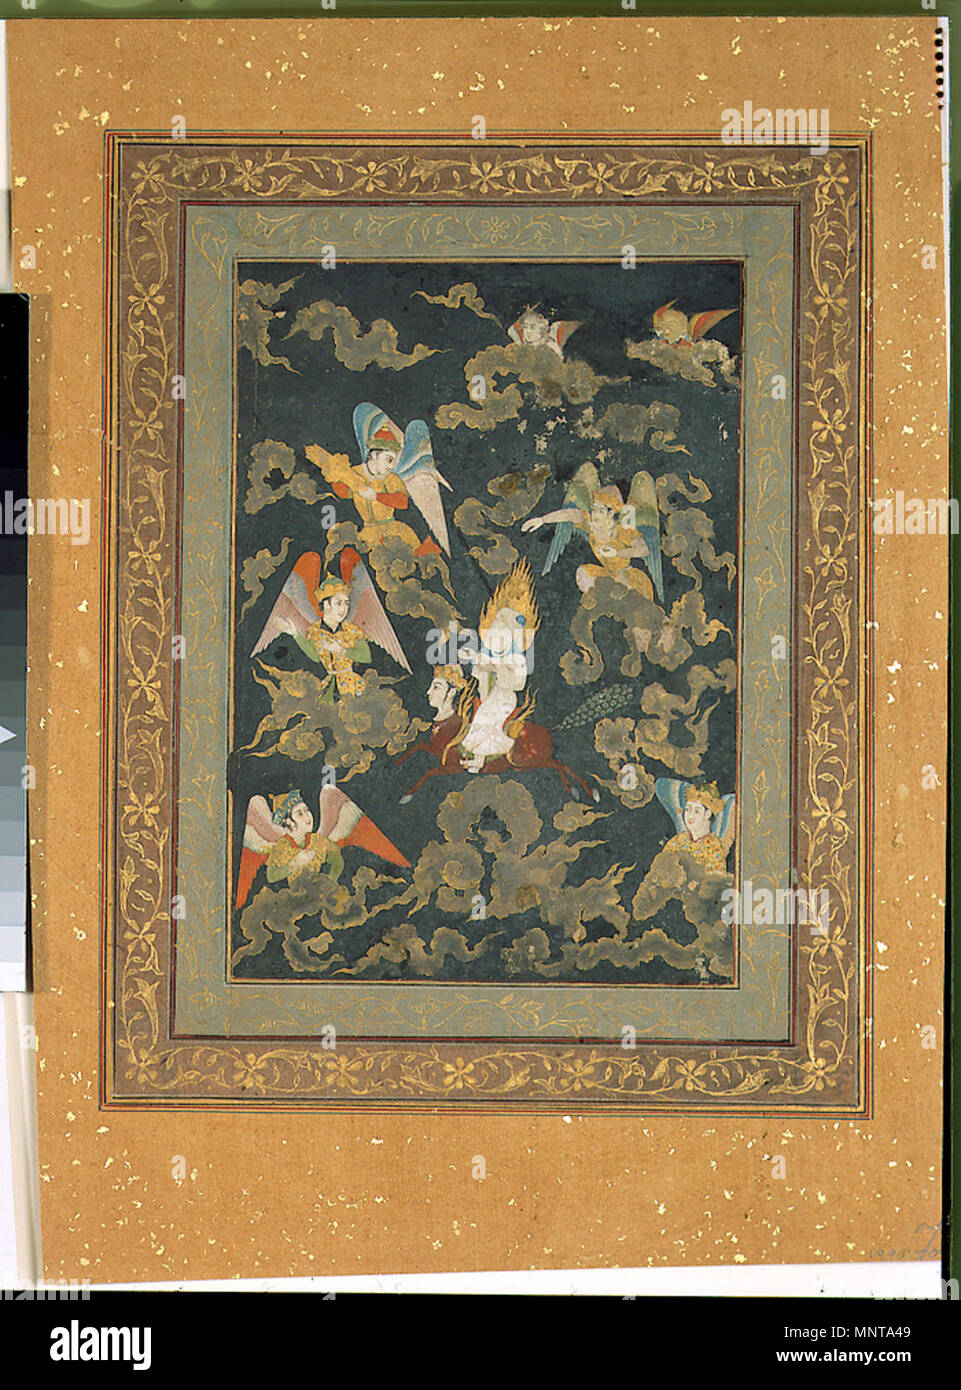 . English: Display Artist: Mir Kalan Khan Creation Date: late 17th century Display Dimensions: 8 7/32 in. x 5 3/4 in. (20.9 cm x 14.6 cm) Credit Line: Edwin Binney 3rd Collection Accession Number: 1990.509 Collection: <a href='http://www.sdmart.org/art/our-collection/asian-art' rel='nofollow'>The San Diego Museum of Art</a> . 6 September 2011, 14:05:59. English: thesandiegomuseumofartcollection 1179 The Prophet Muhammad's ascent to heaven- the Mi'raj (6125052426) Stock Photo